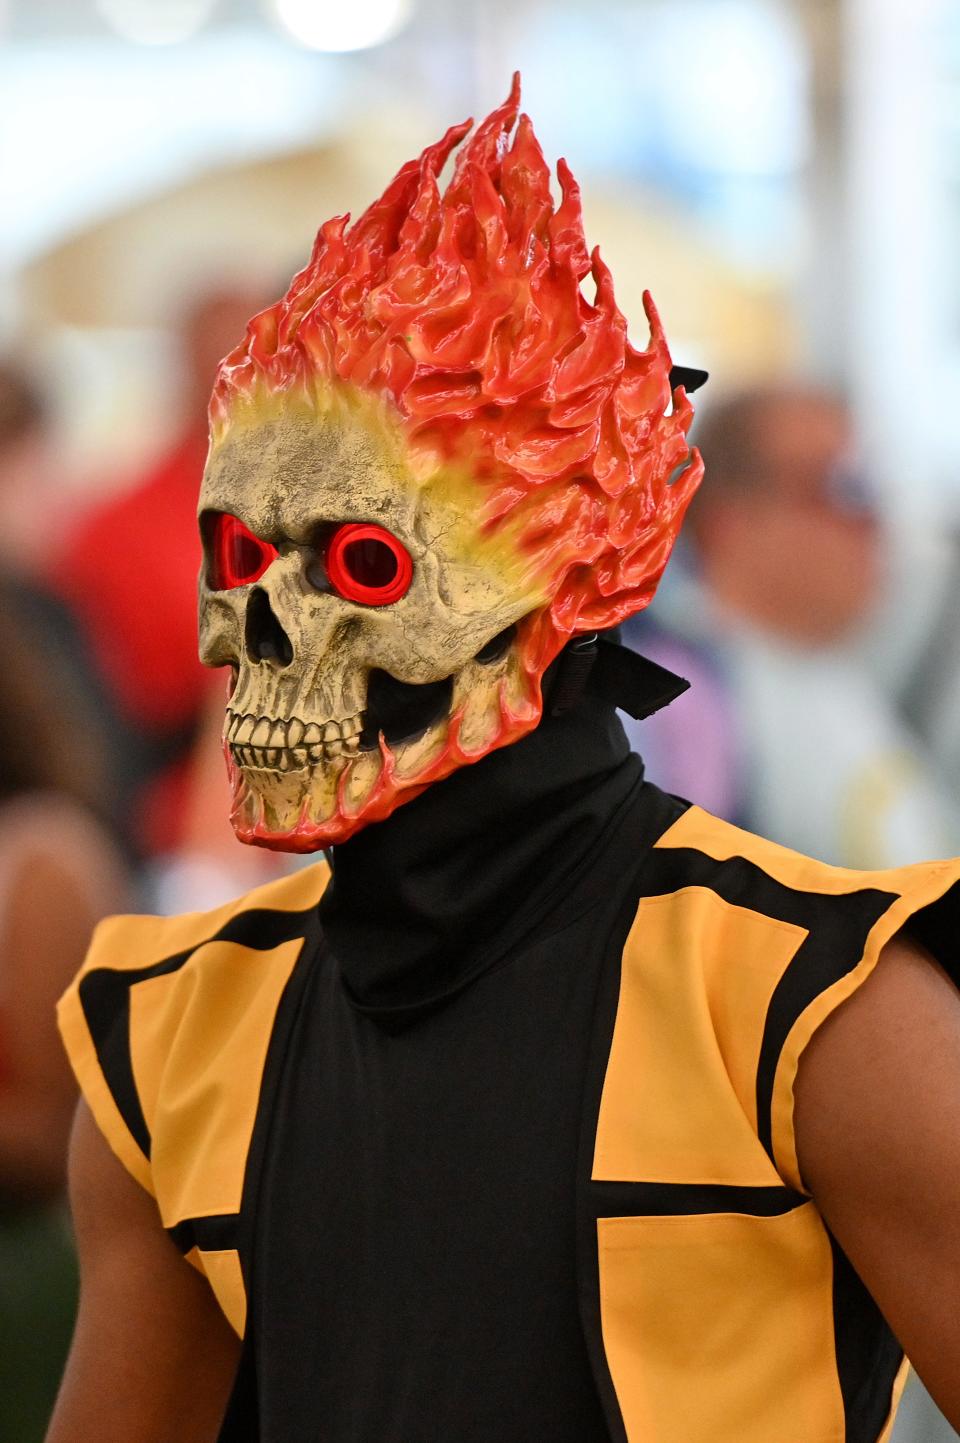 A cosplayer dressed as Scorpion from Mortal Kombat attends New York Comic Con 2019 on Oct. 6, 2019 in New York City.